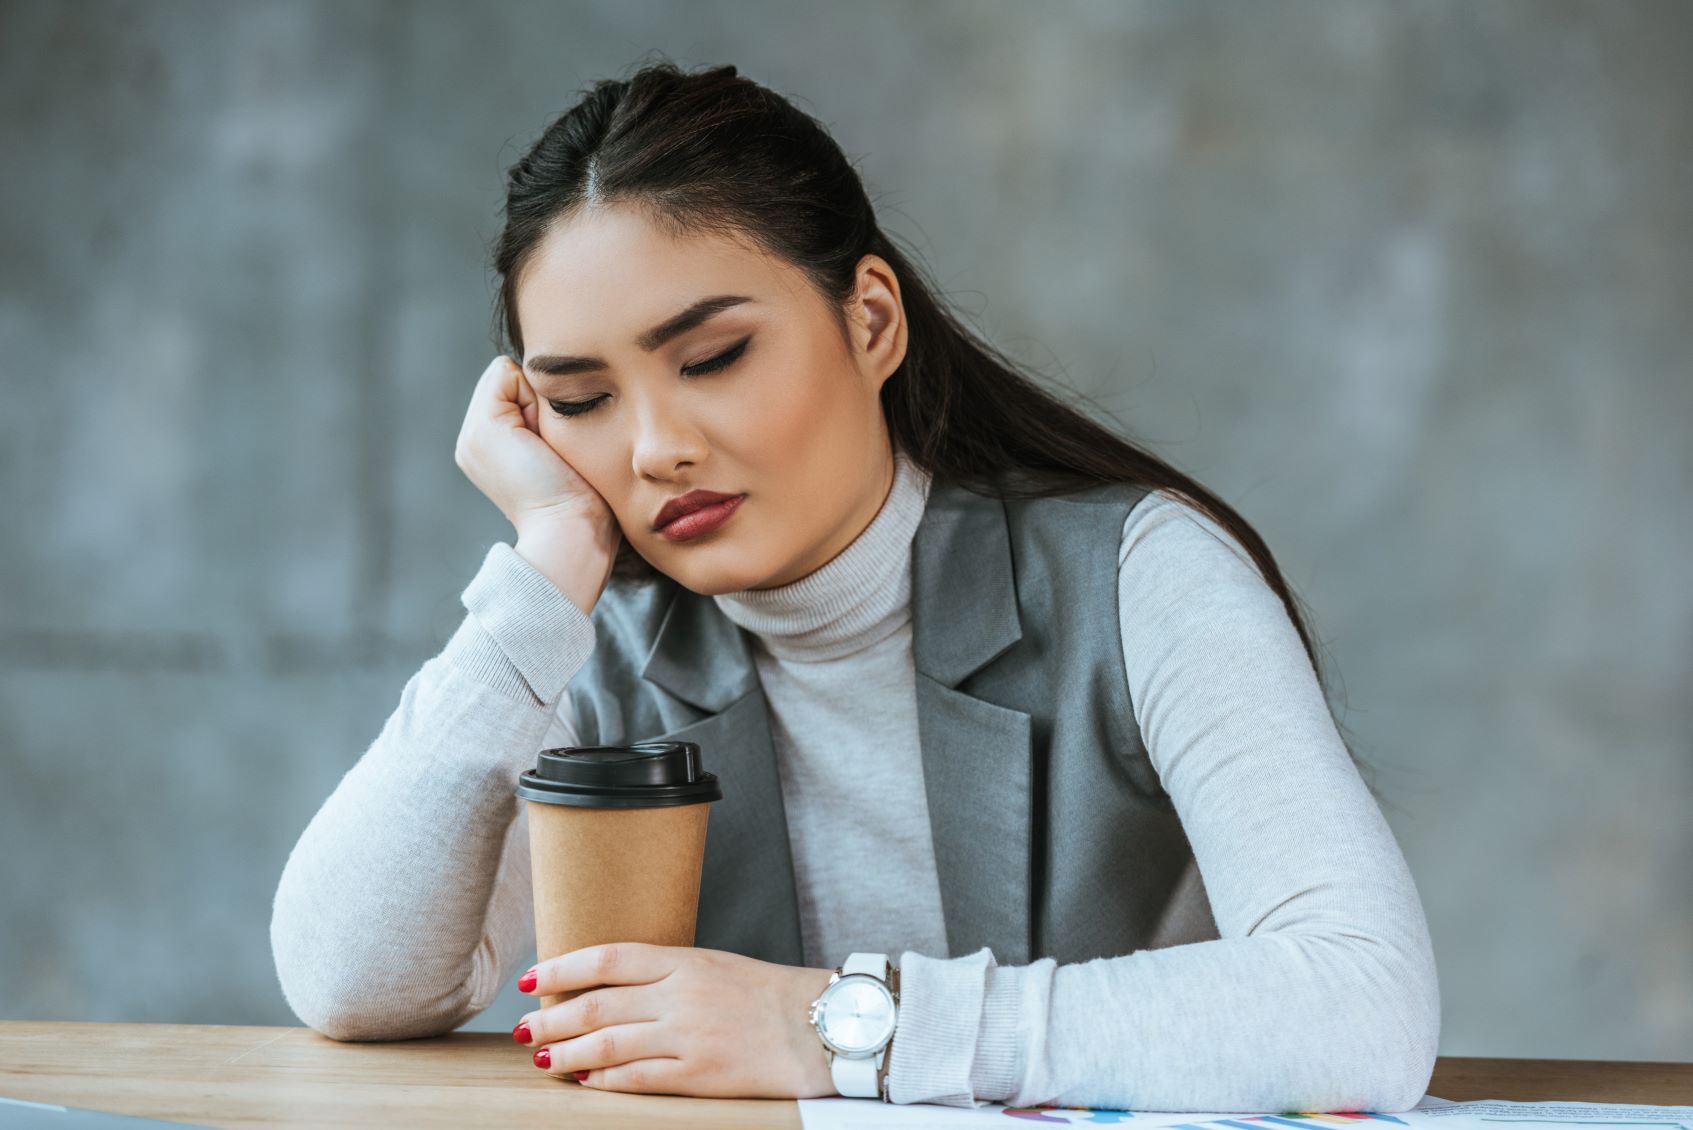 Woman tired due to lack of sleep.